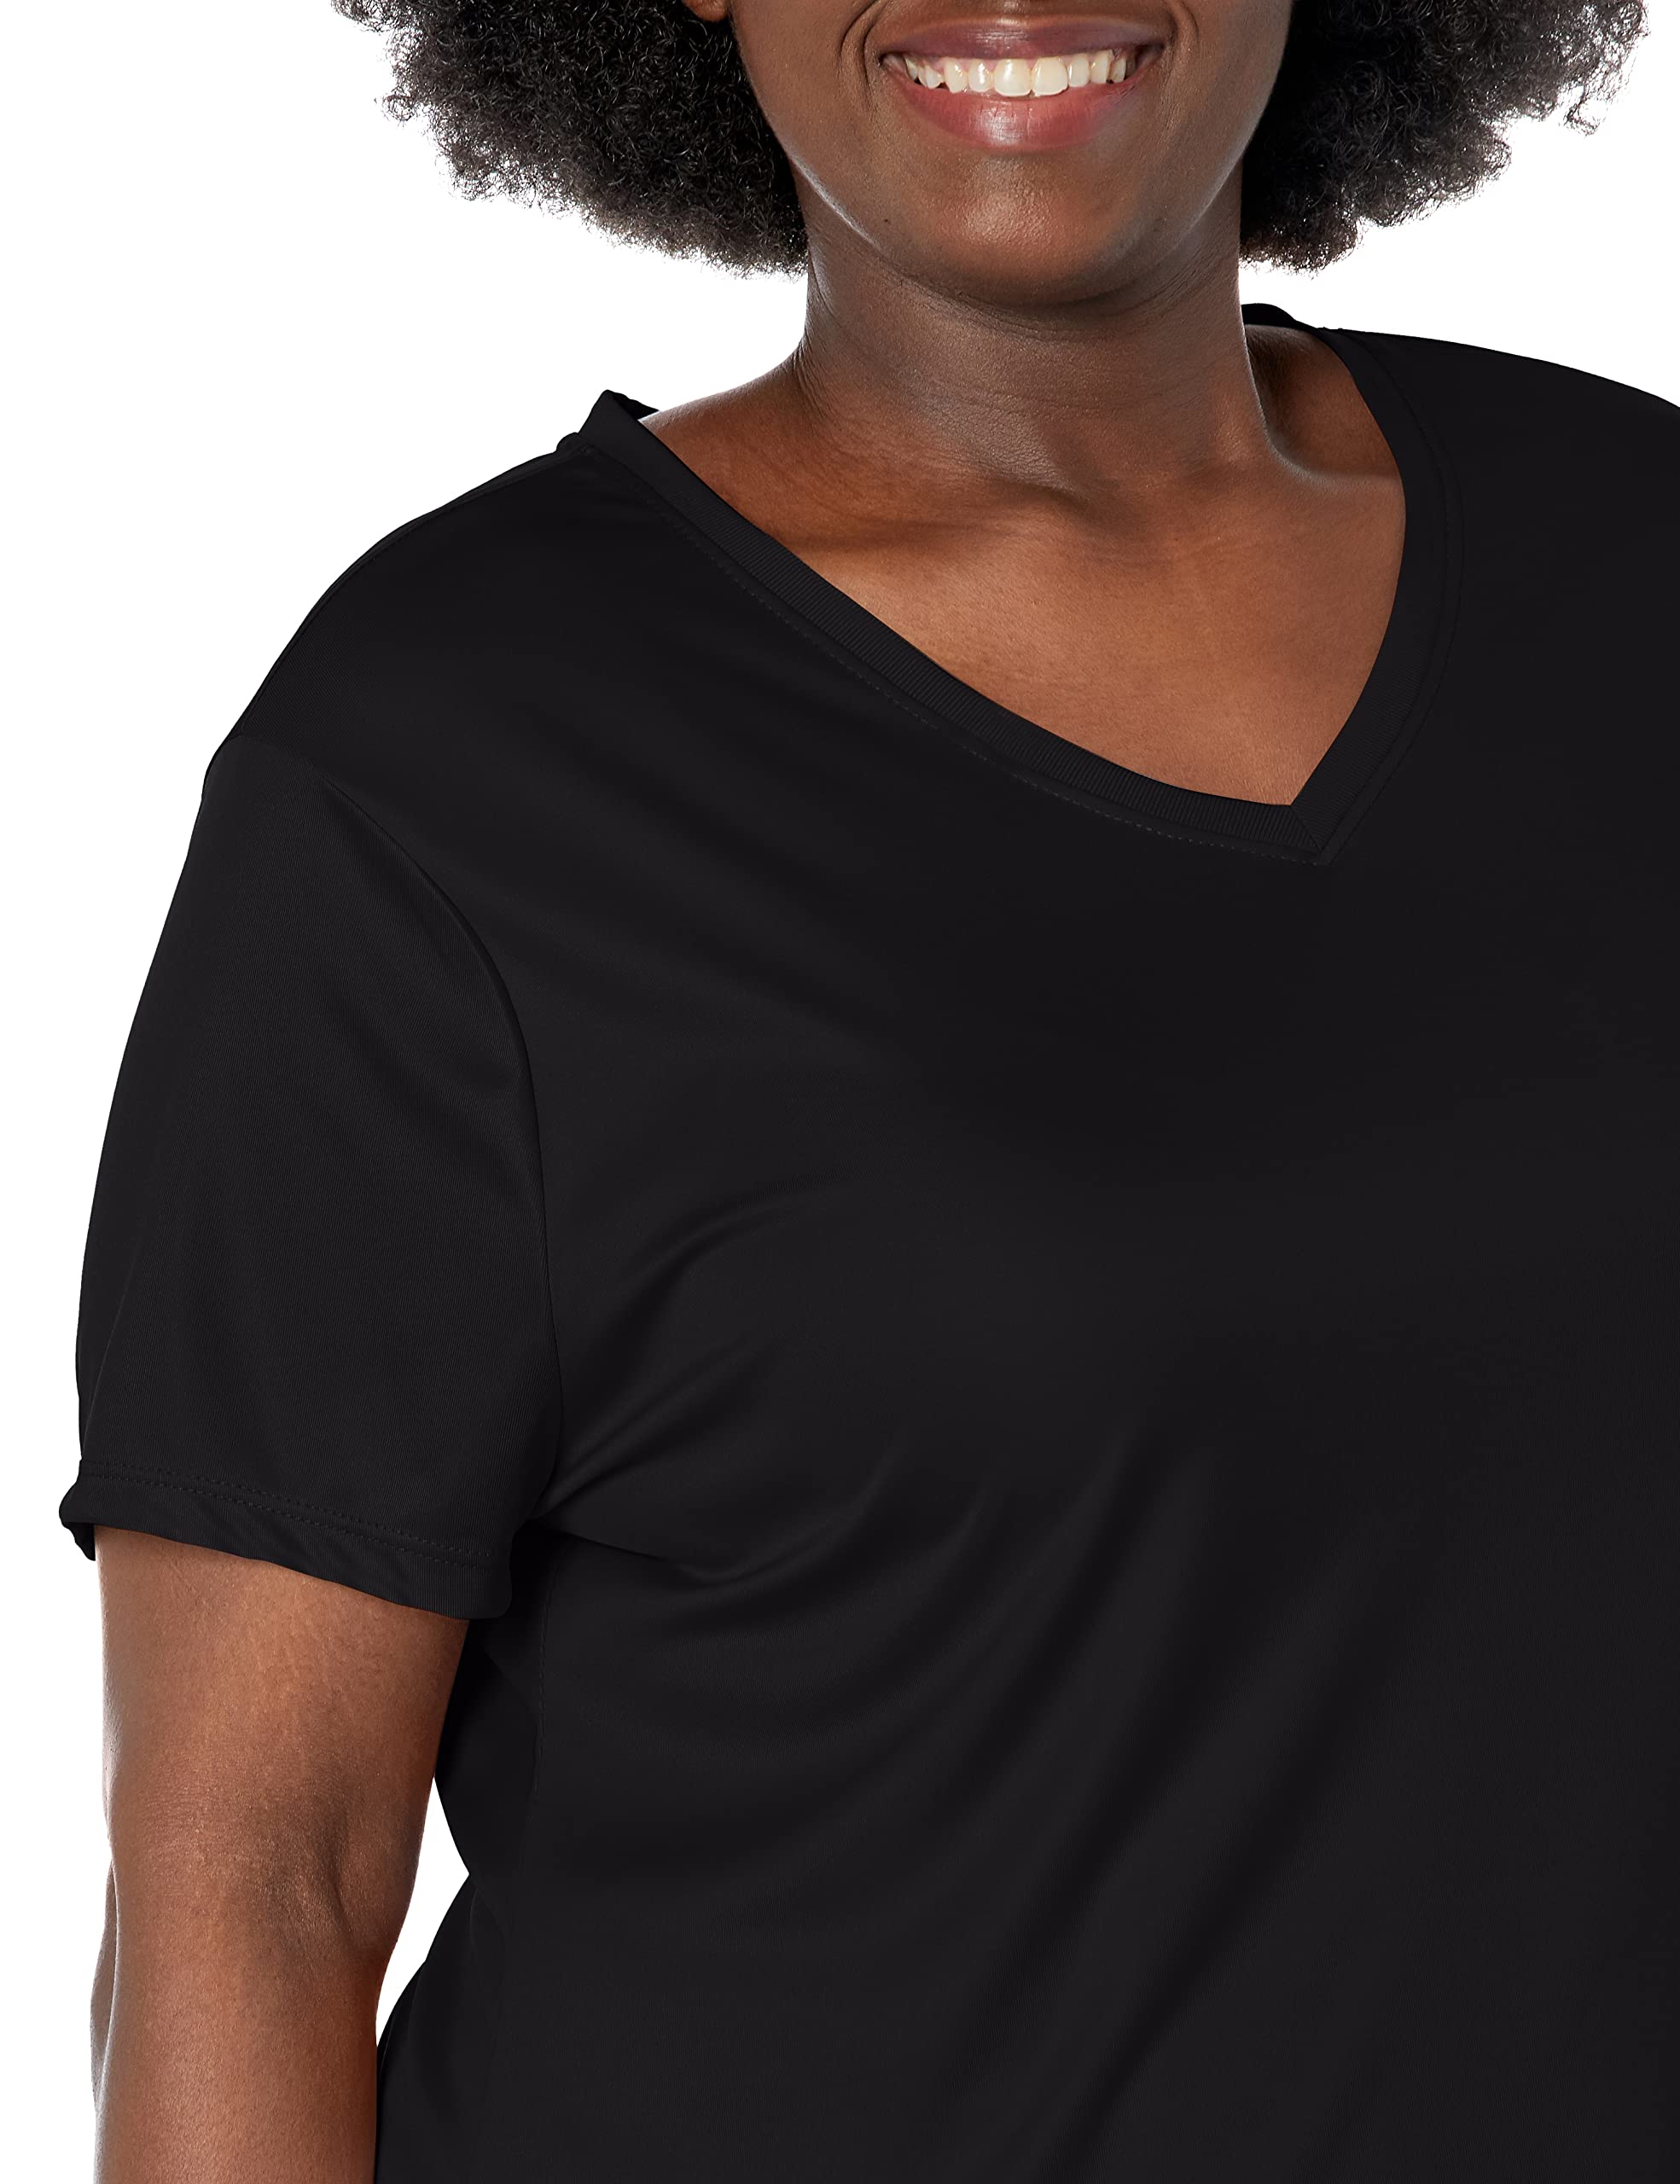 Just My Size Women's Plus-Size Cool DRI Short Sleeve V-Neck Tee